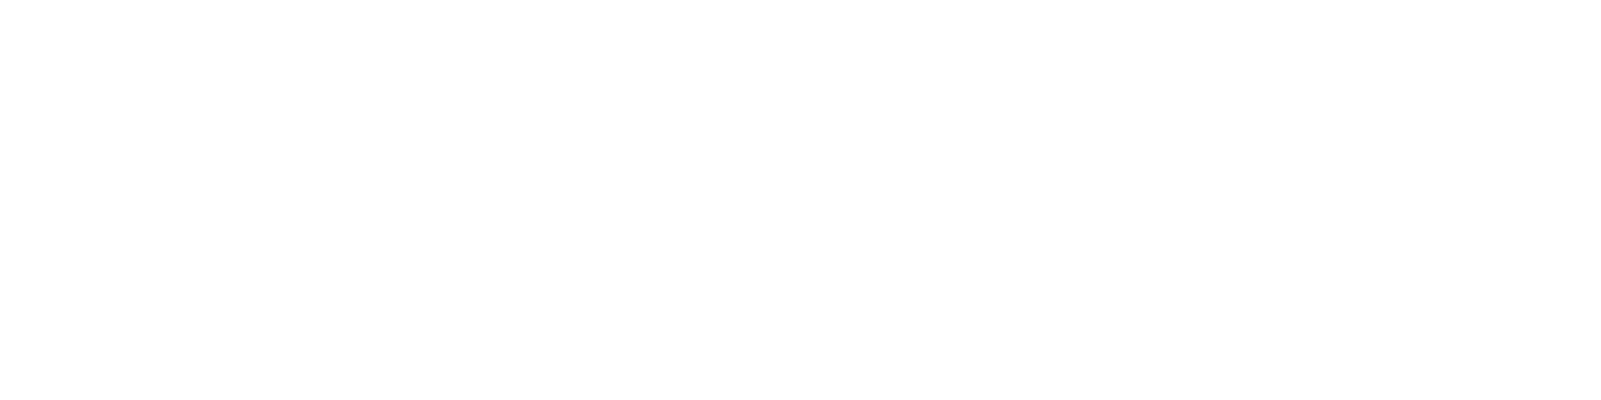 Cape May Inns for sale by Chris Clemans Sotheby's International Realty